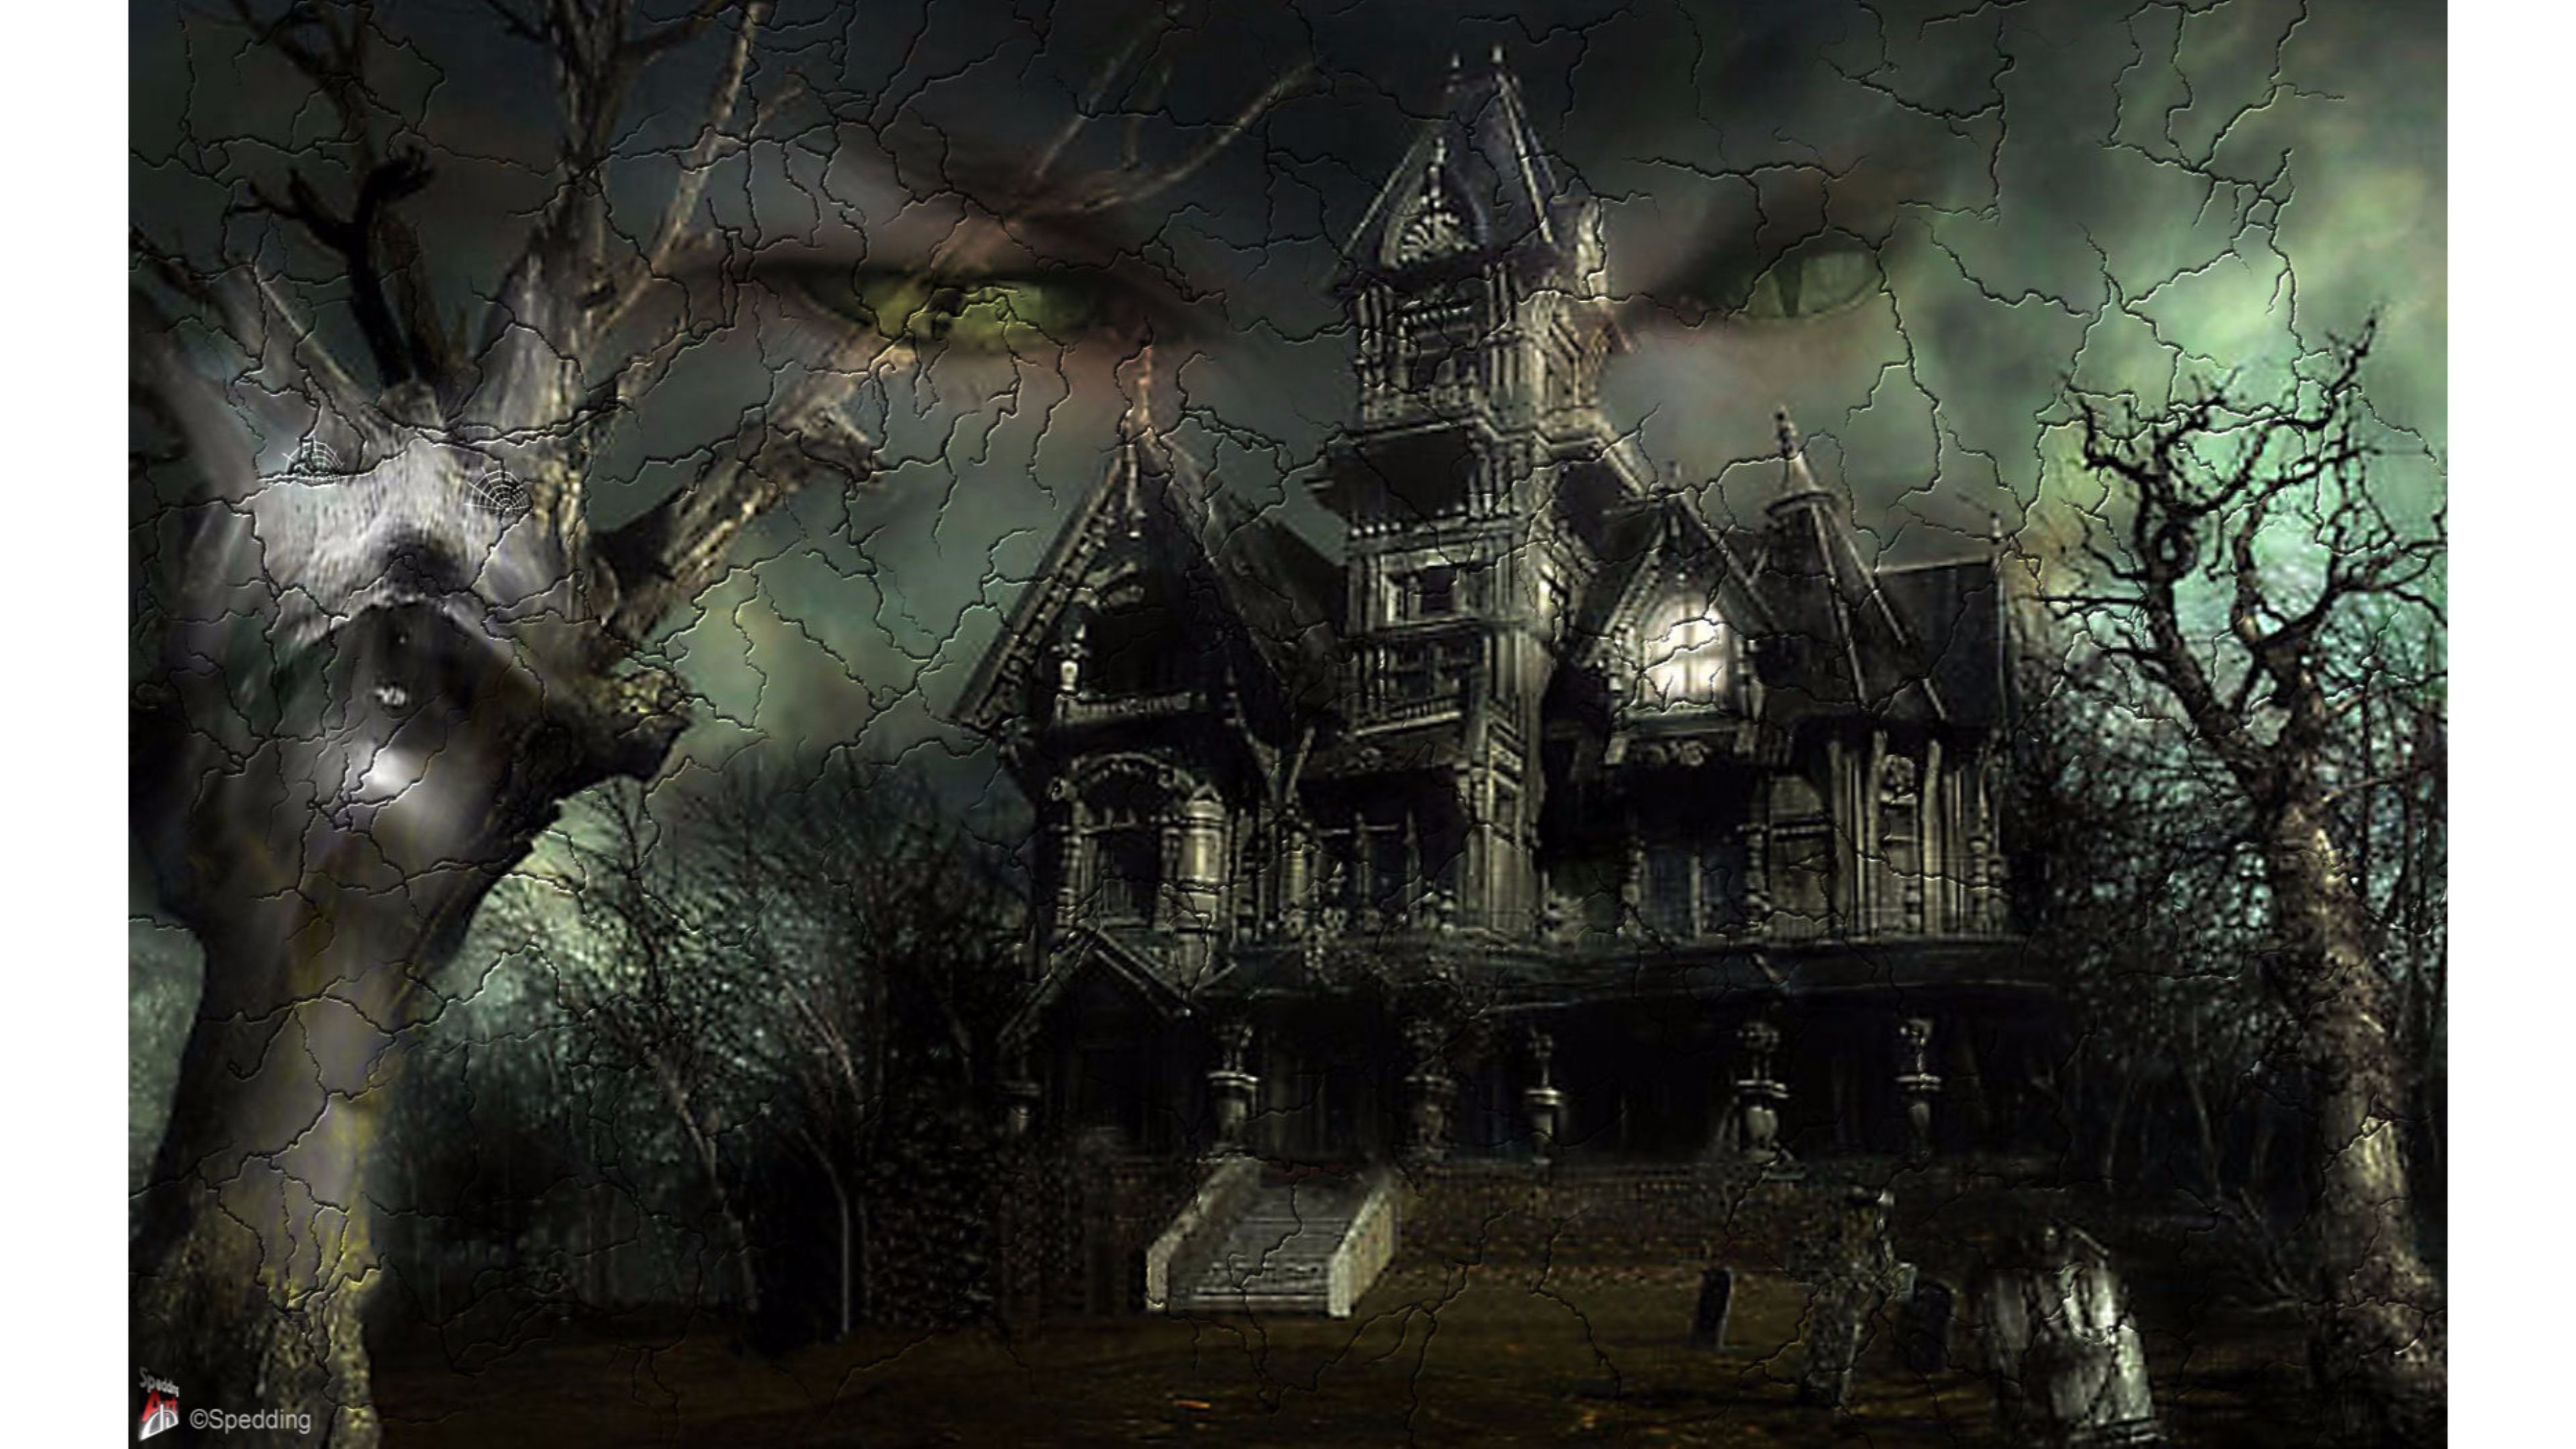 Scary Halloween Background (60+ images)